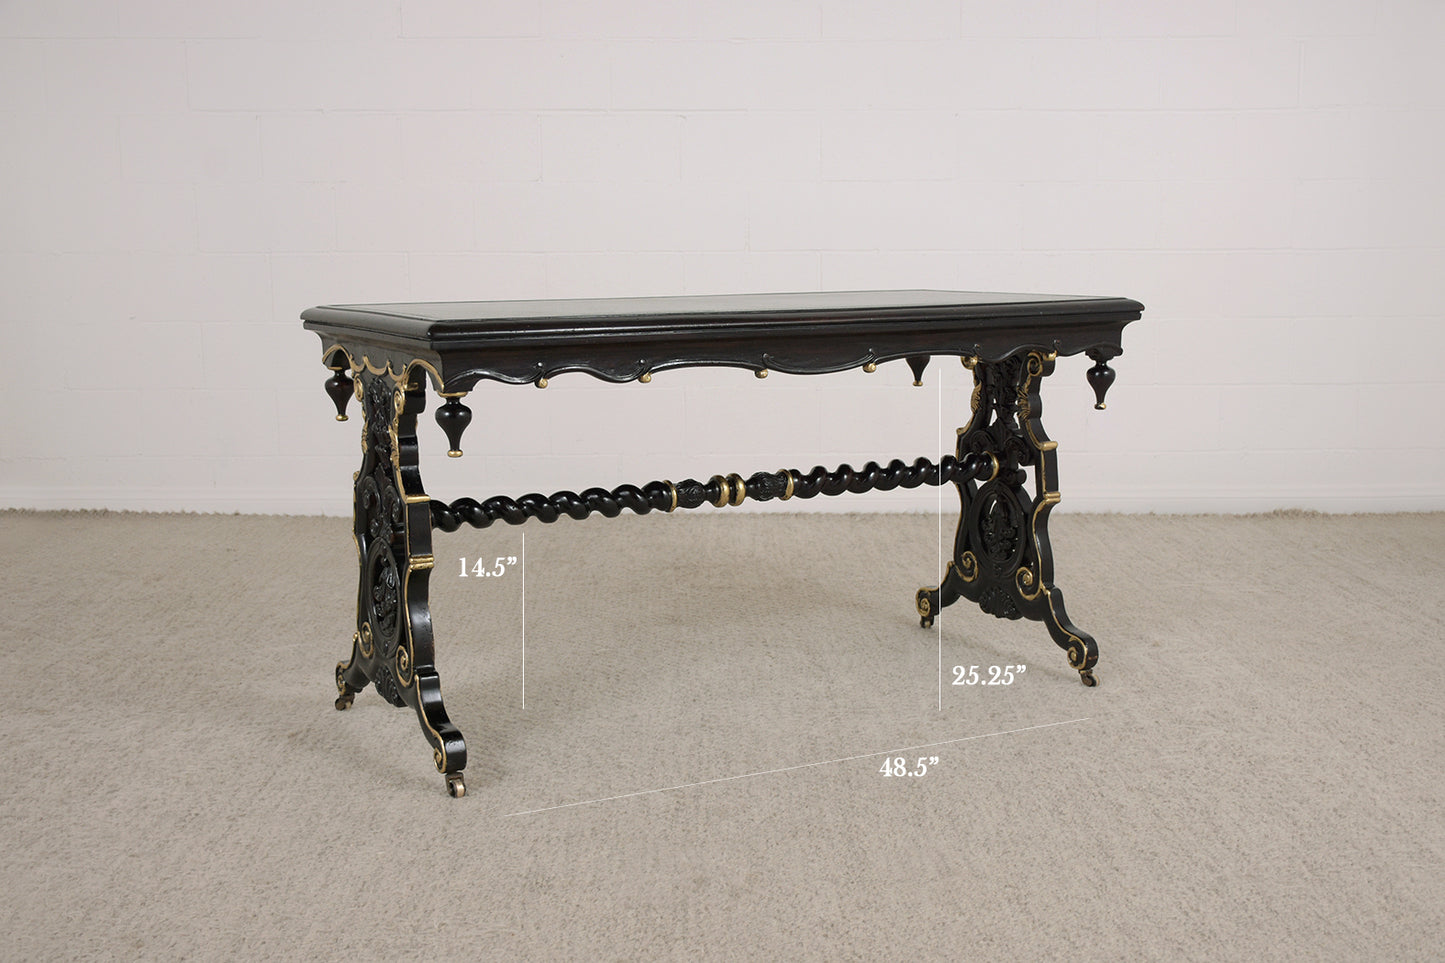 1970s Jacobean Mahogany Writing Table with Engraved Leather Top & Gilt Accents